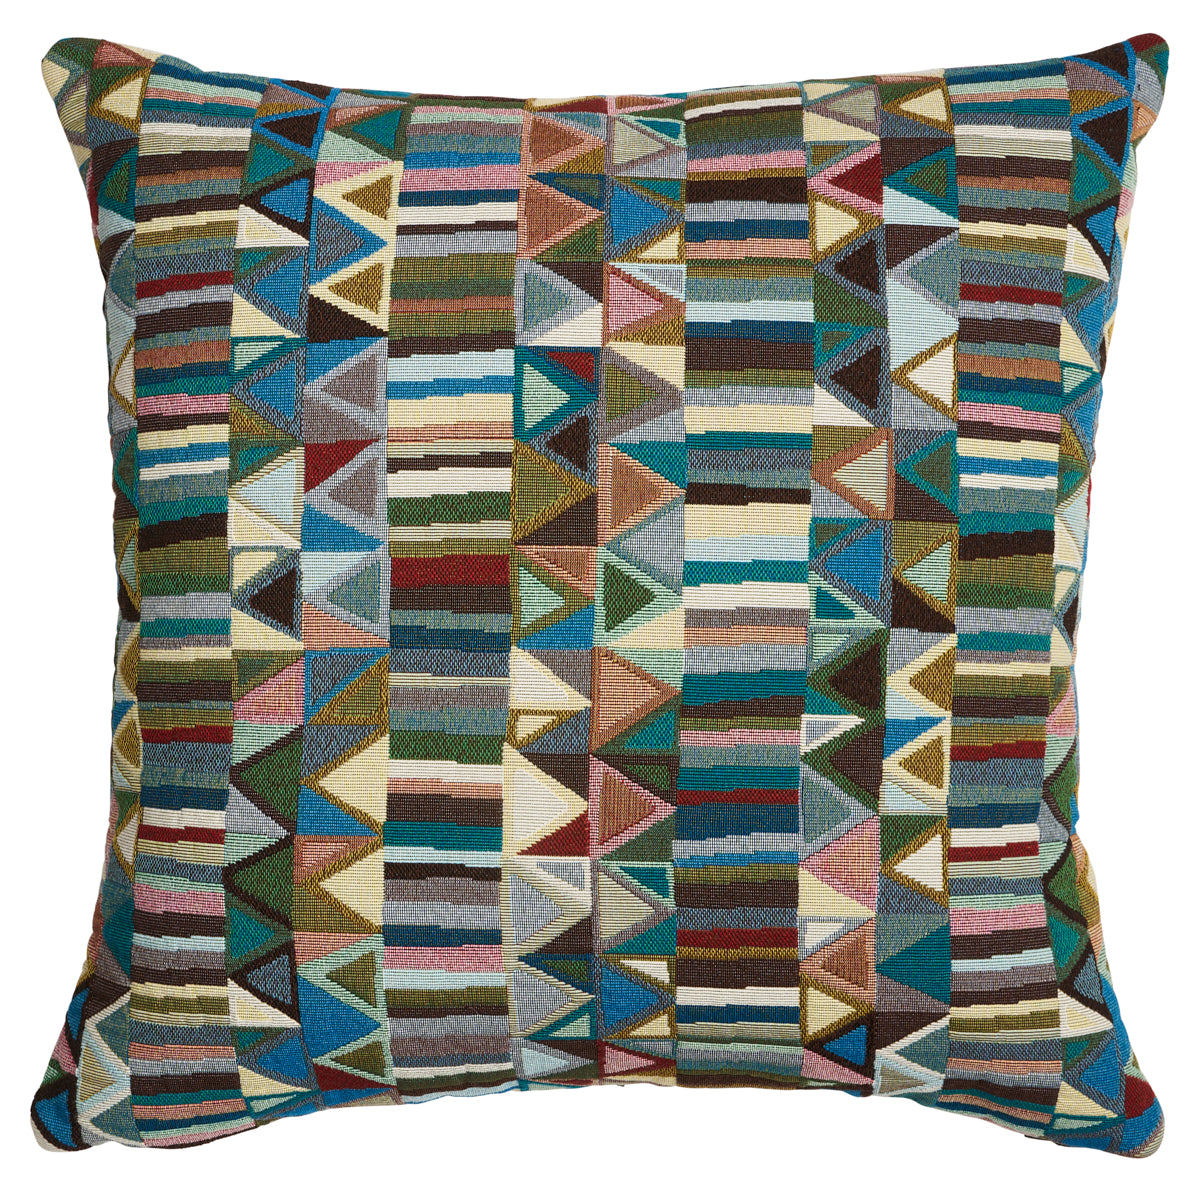 Purchase So8202005 | Bizantino Quilted Weave Pillow, Peacock - Schumacher Pillows